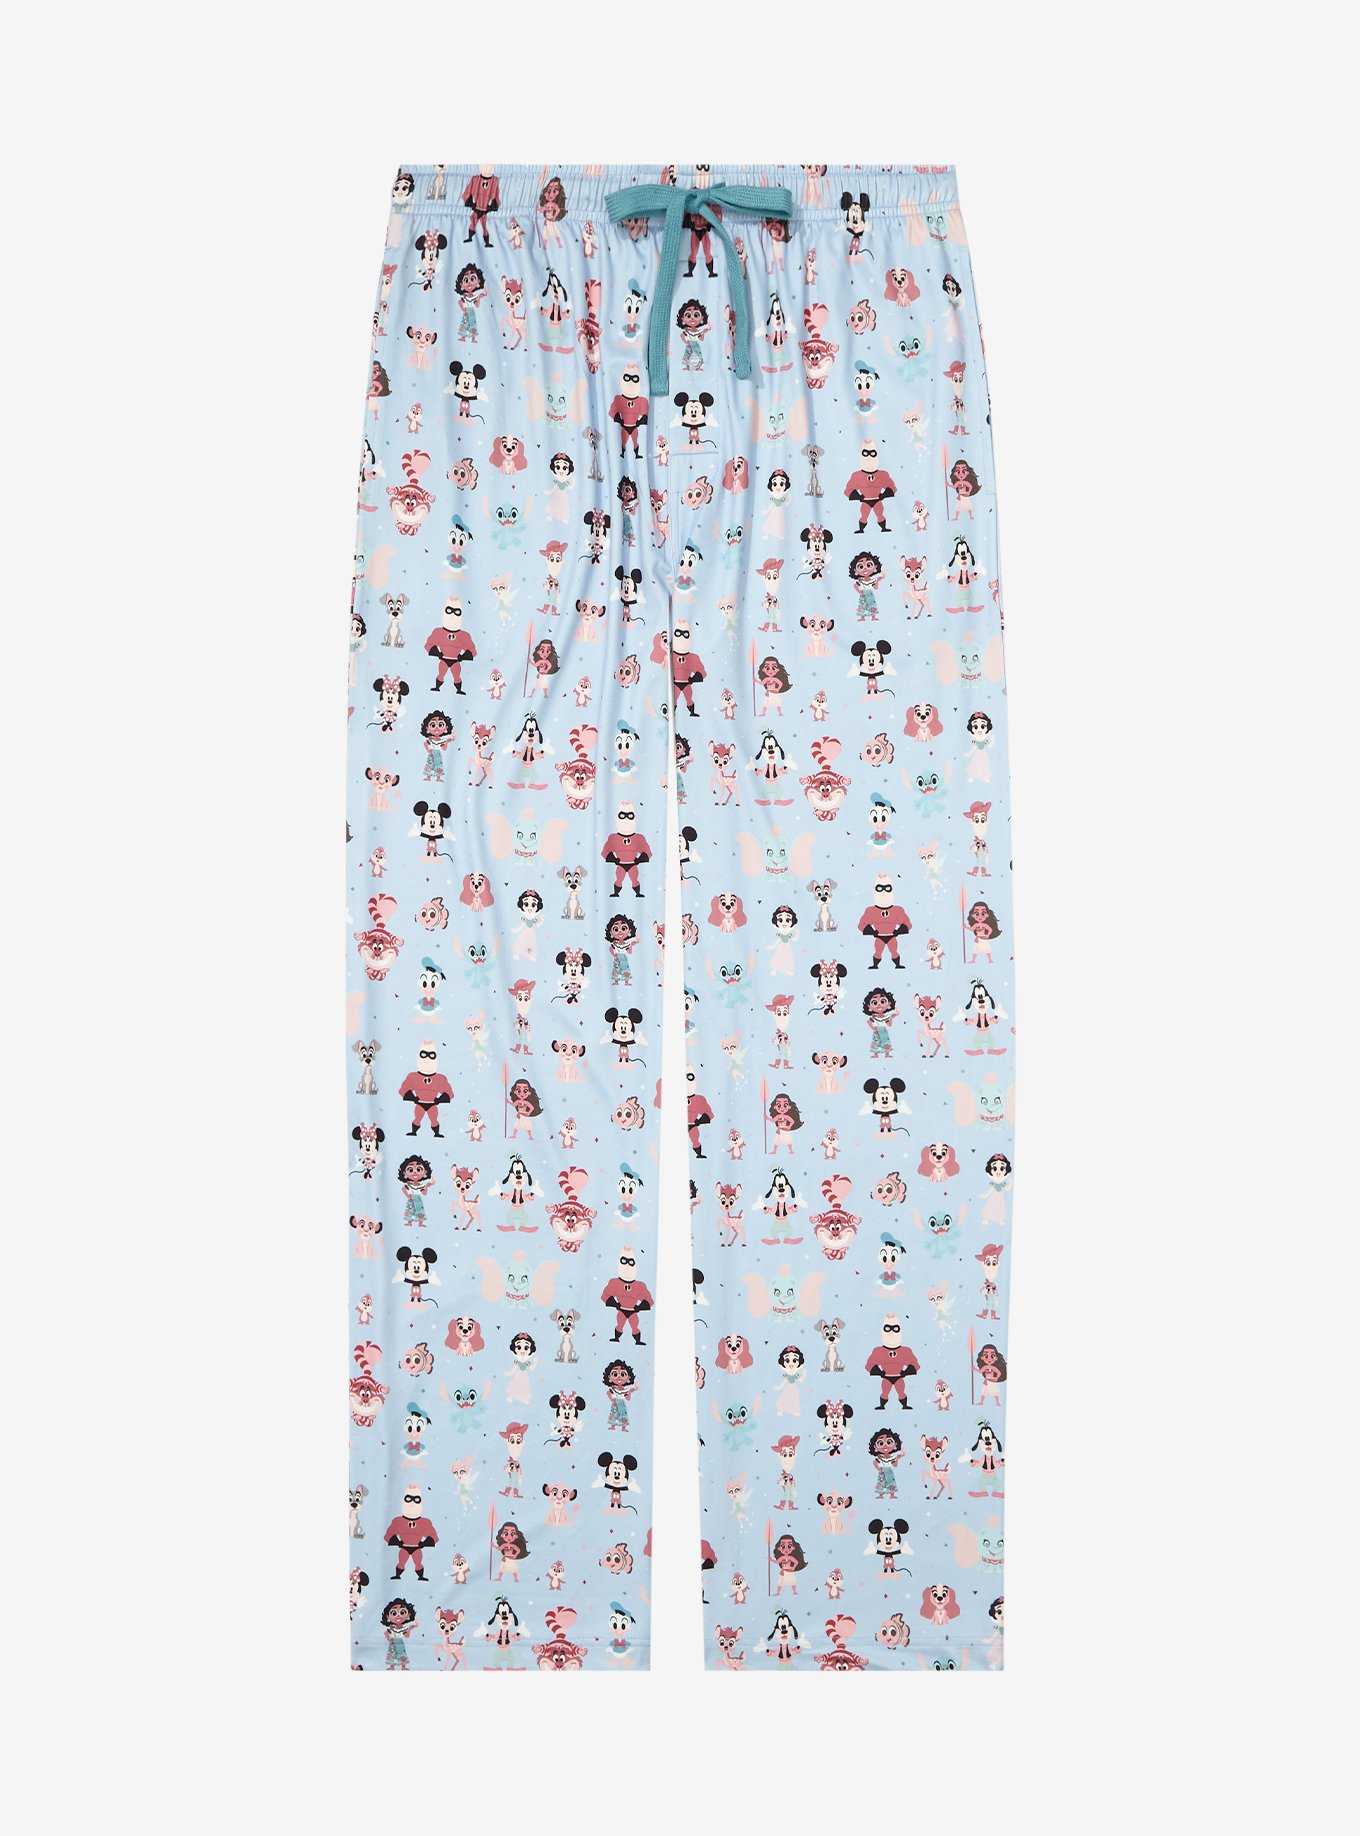 Disney 100 Character Portrait Allover Print Sleep Pants - BoxLunch Exclusive, , hi-res